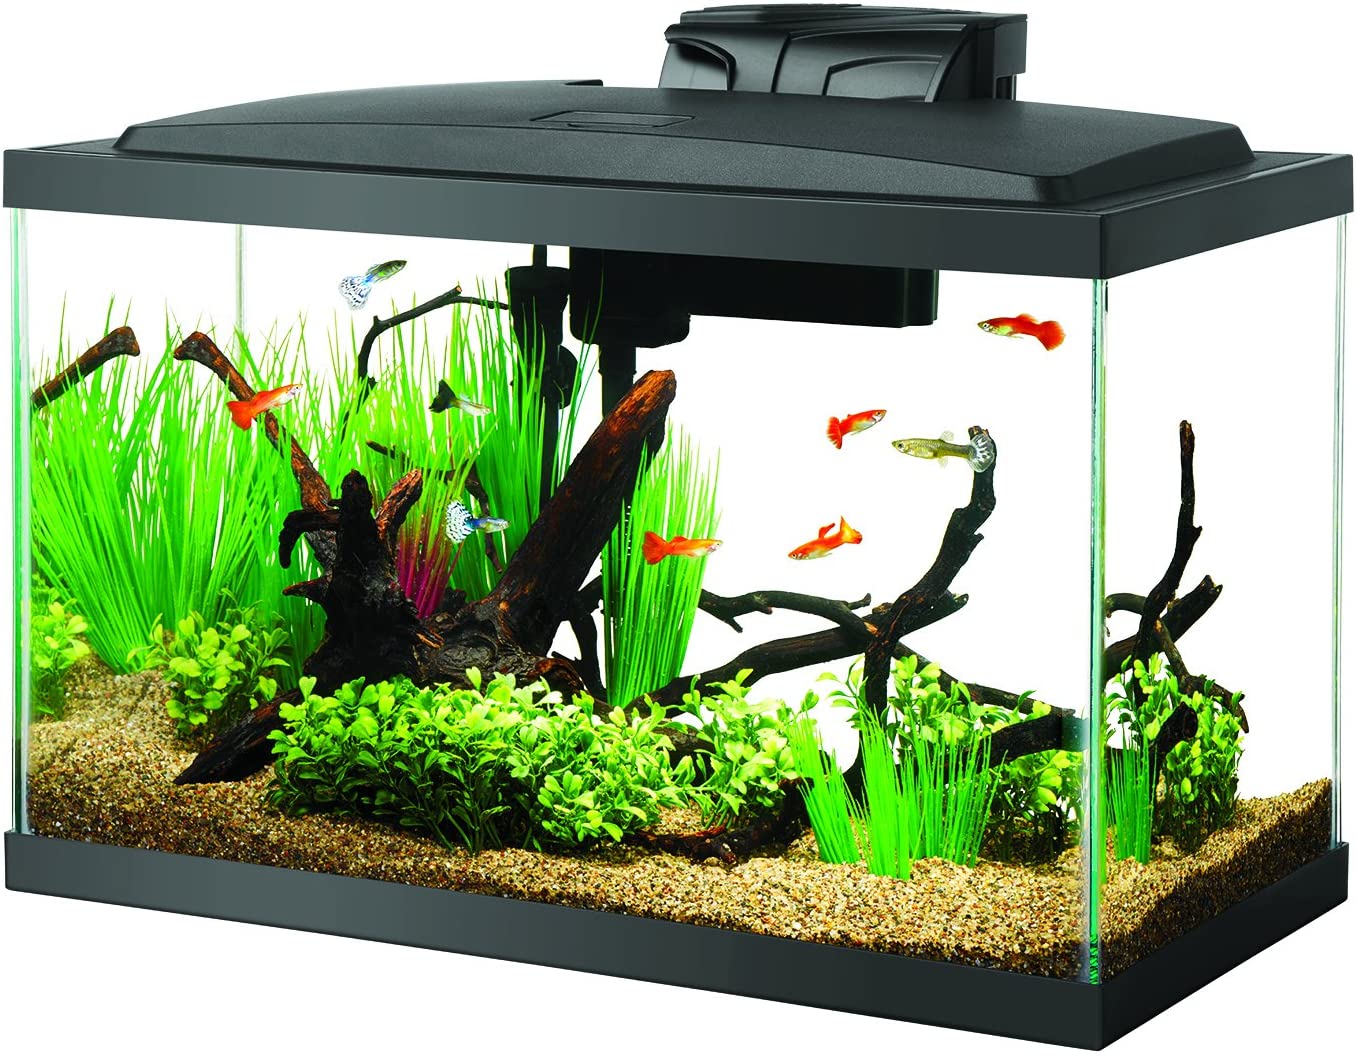 10 Gallon Fish Tanks - Options and Reviews 2022 | A Little Bit Fishy